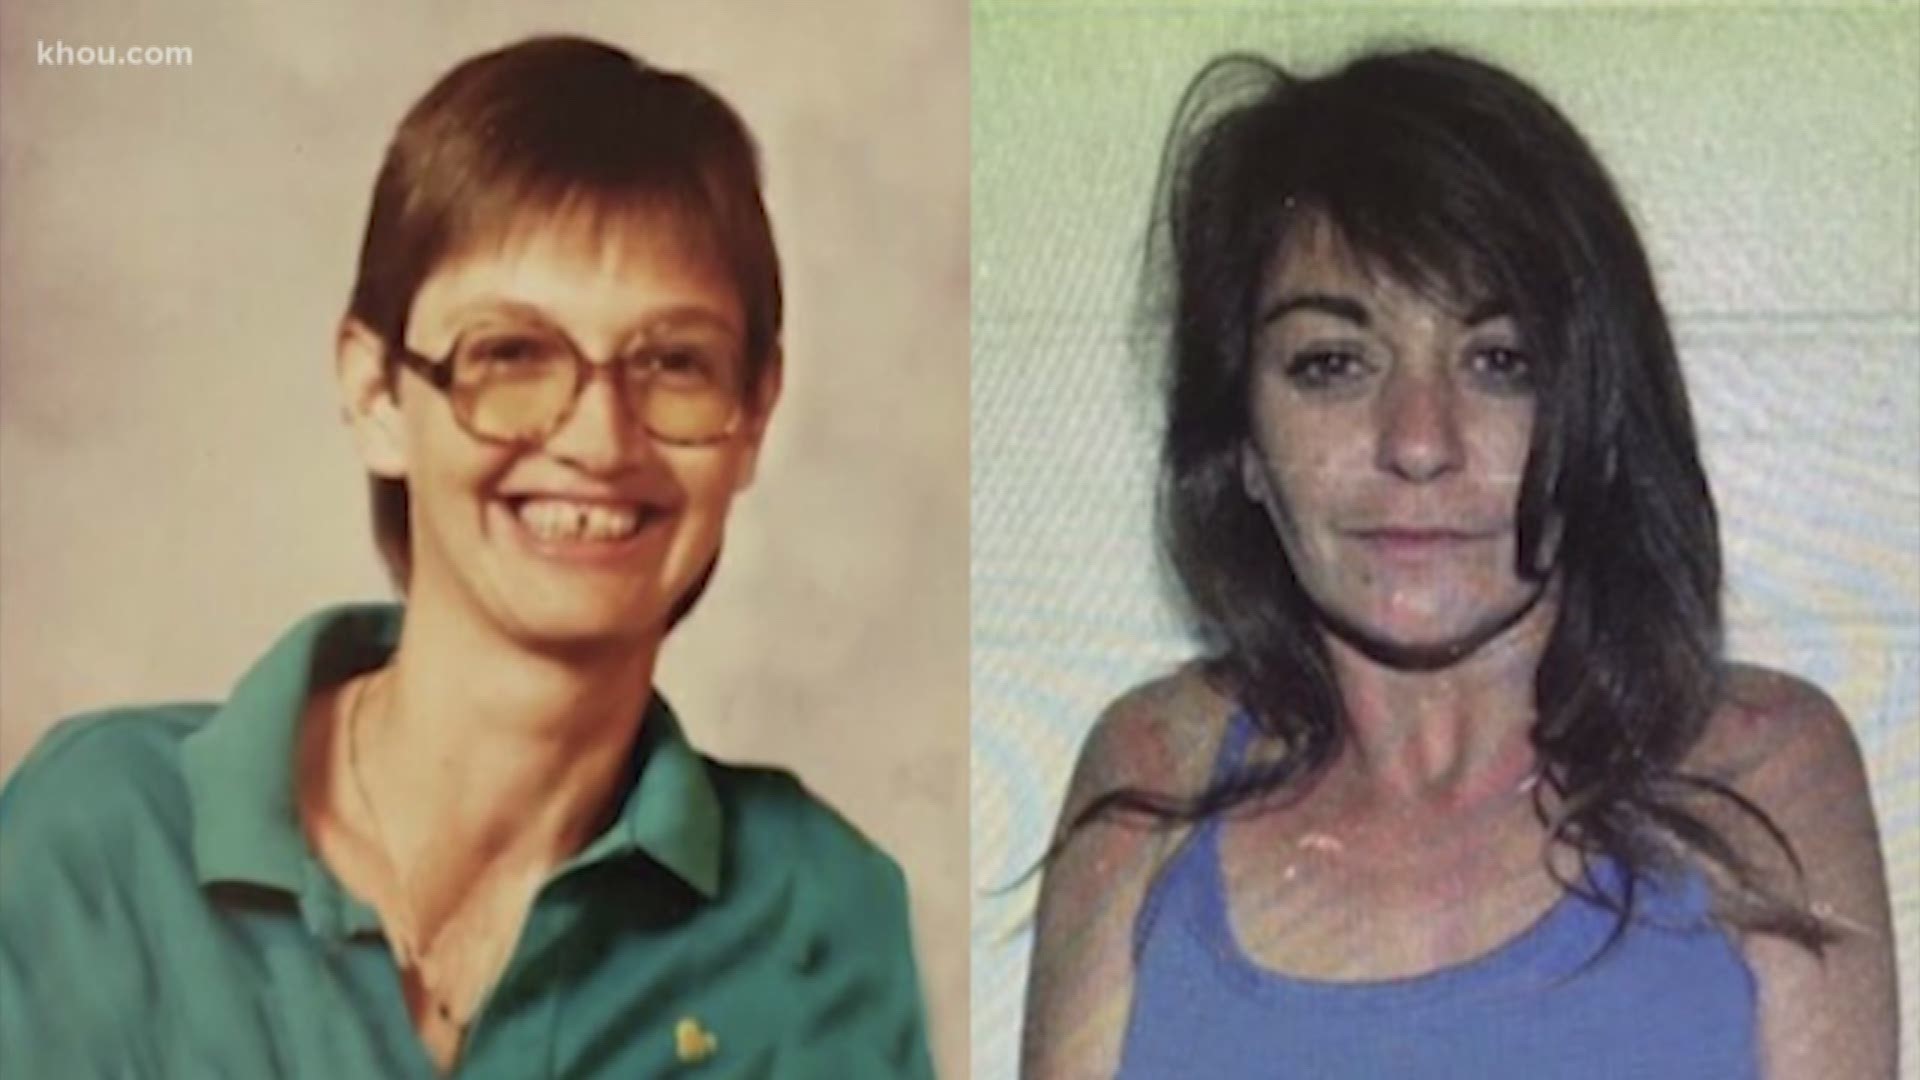 KHOU 11 Reporter Jessica Borg gives an exclusive tour of the DNA ancestry company that helped police identify the two women killed near the 'Killing Fields' off I-45.